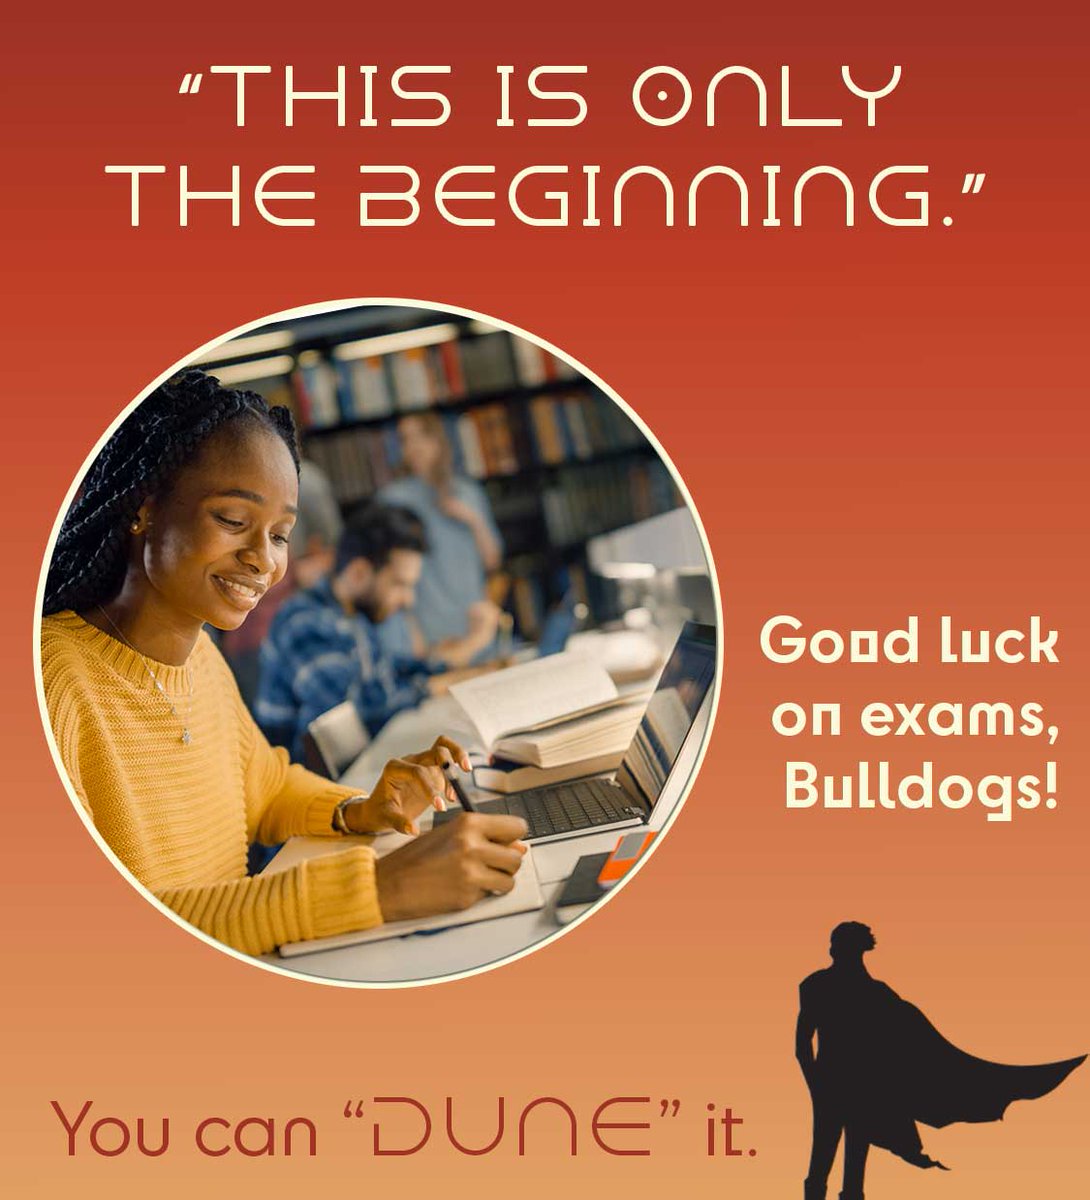 Exams begin today. And you know, you've got this! We want to wish all our students the best of luck. Remember we are here for you! Take it one step at a time. And don't forget to breathe. #DeStressFest #finals #exams